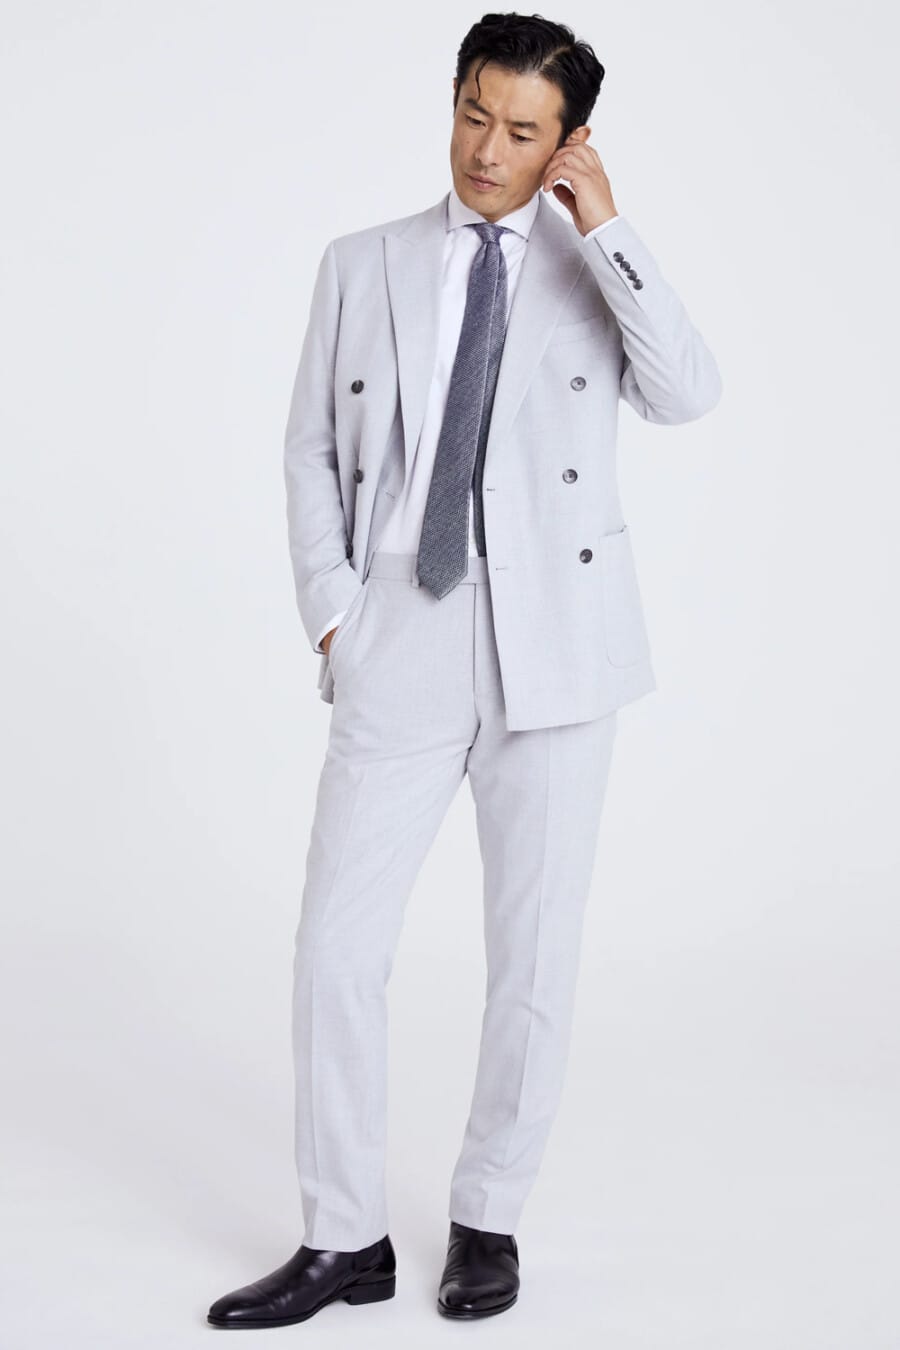 Men's light grey-blue double-breasted suit, white shirt, grey tie and black leather Chelsea boots outfit